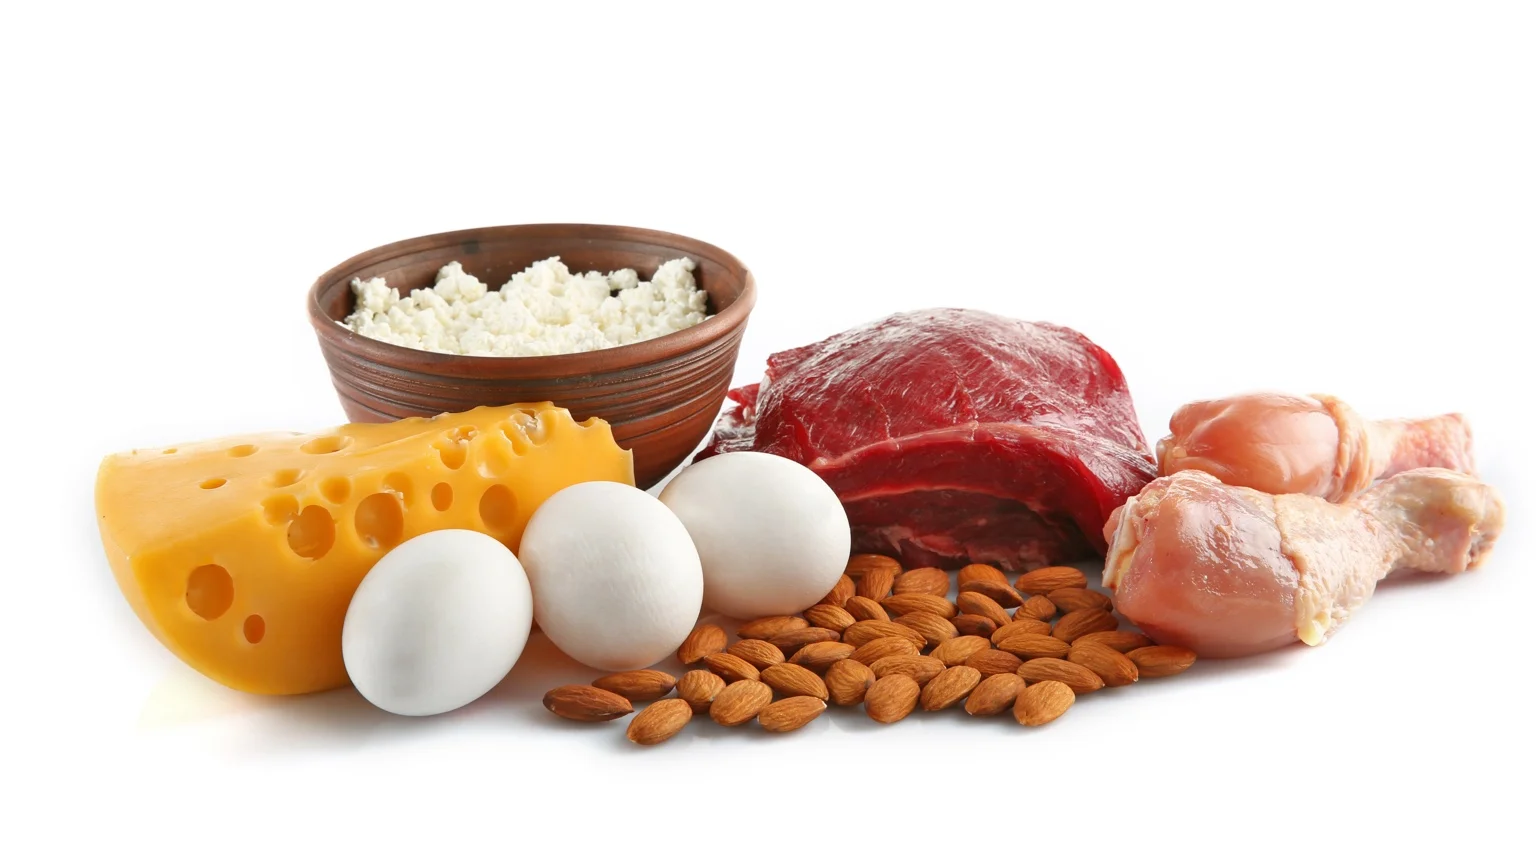 photo - Sources of protein